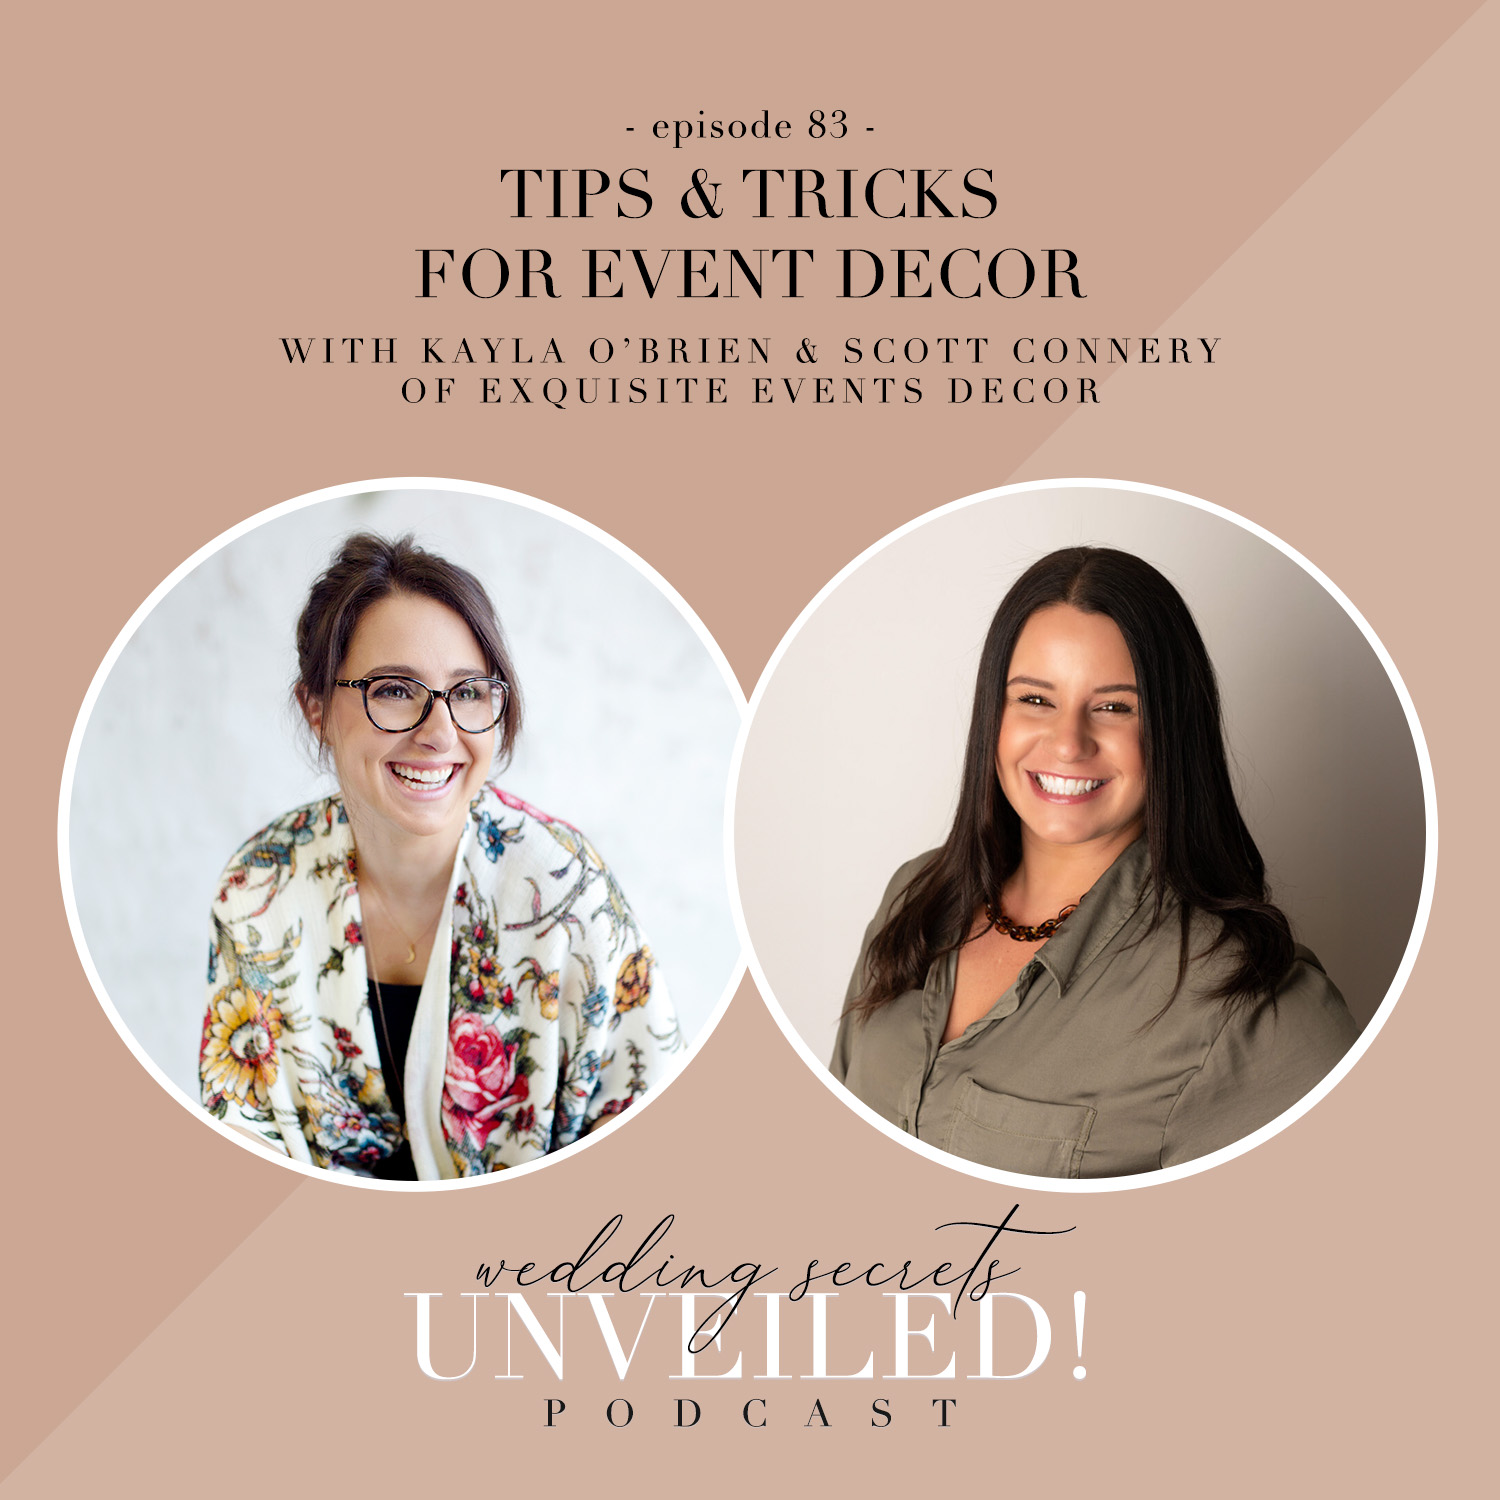 Tips & Tricks for Event Design: how to create personalized wedding designs with Exquisite Events Decor on Wedding Secrets Unveiled! Podcast